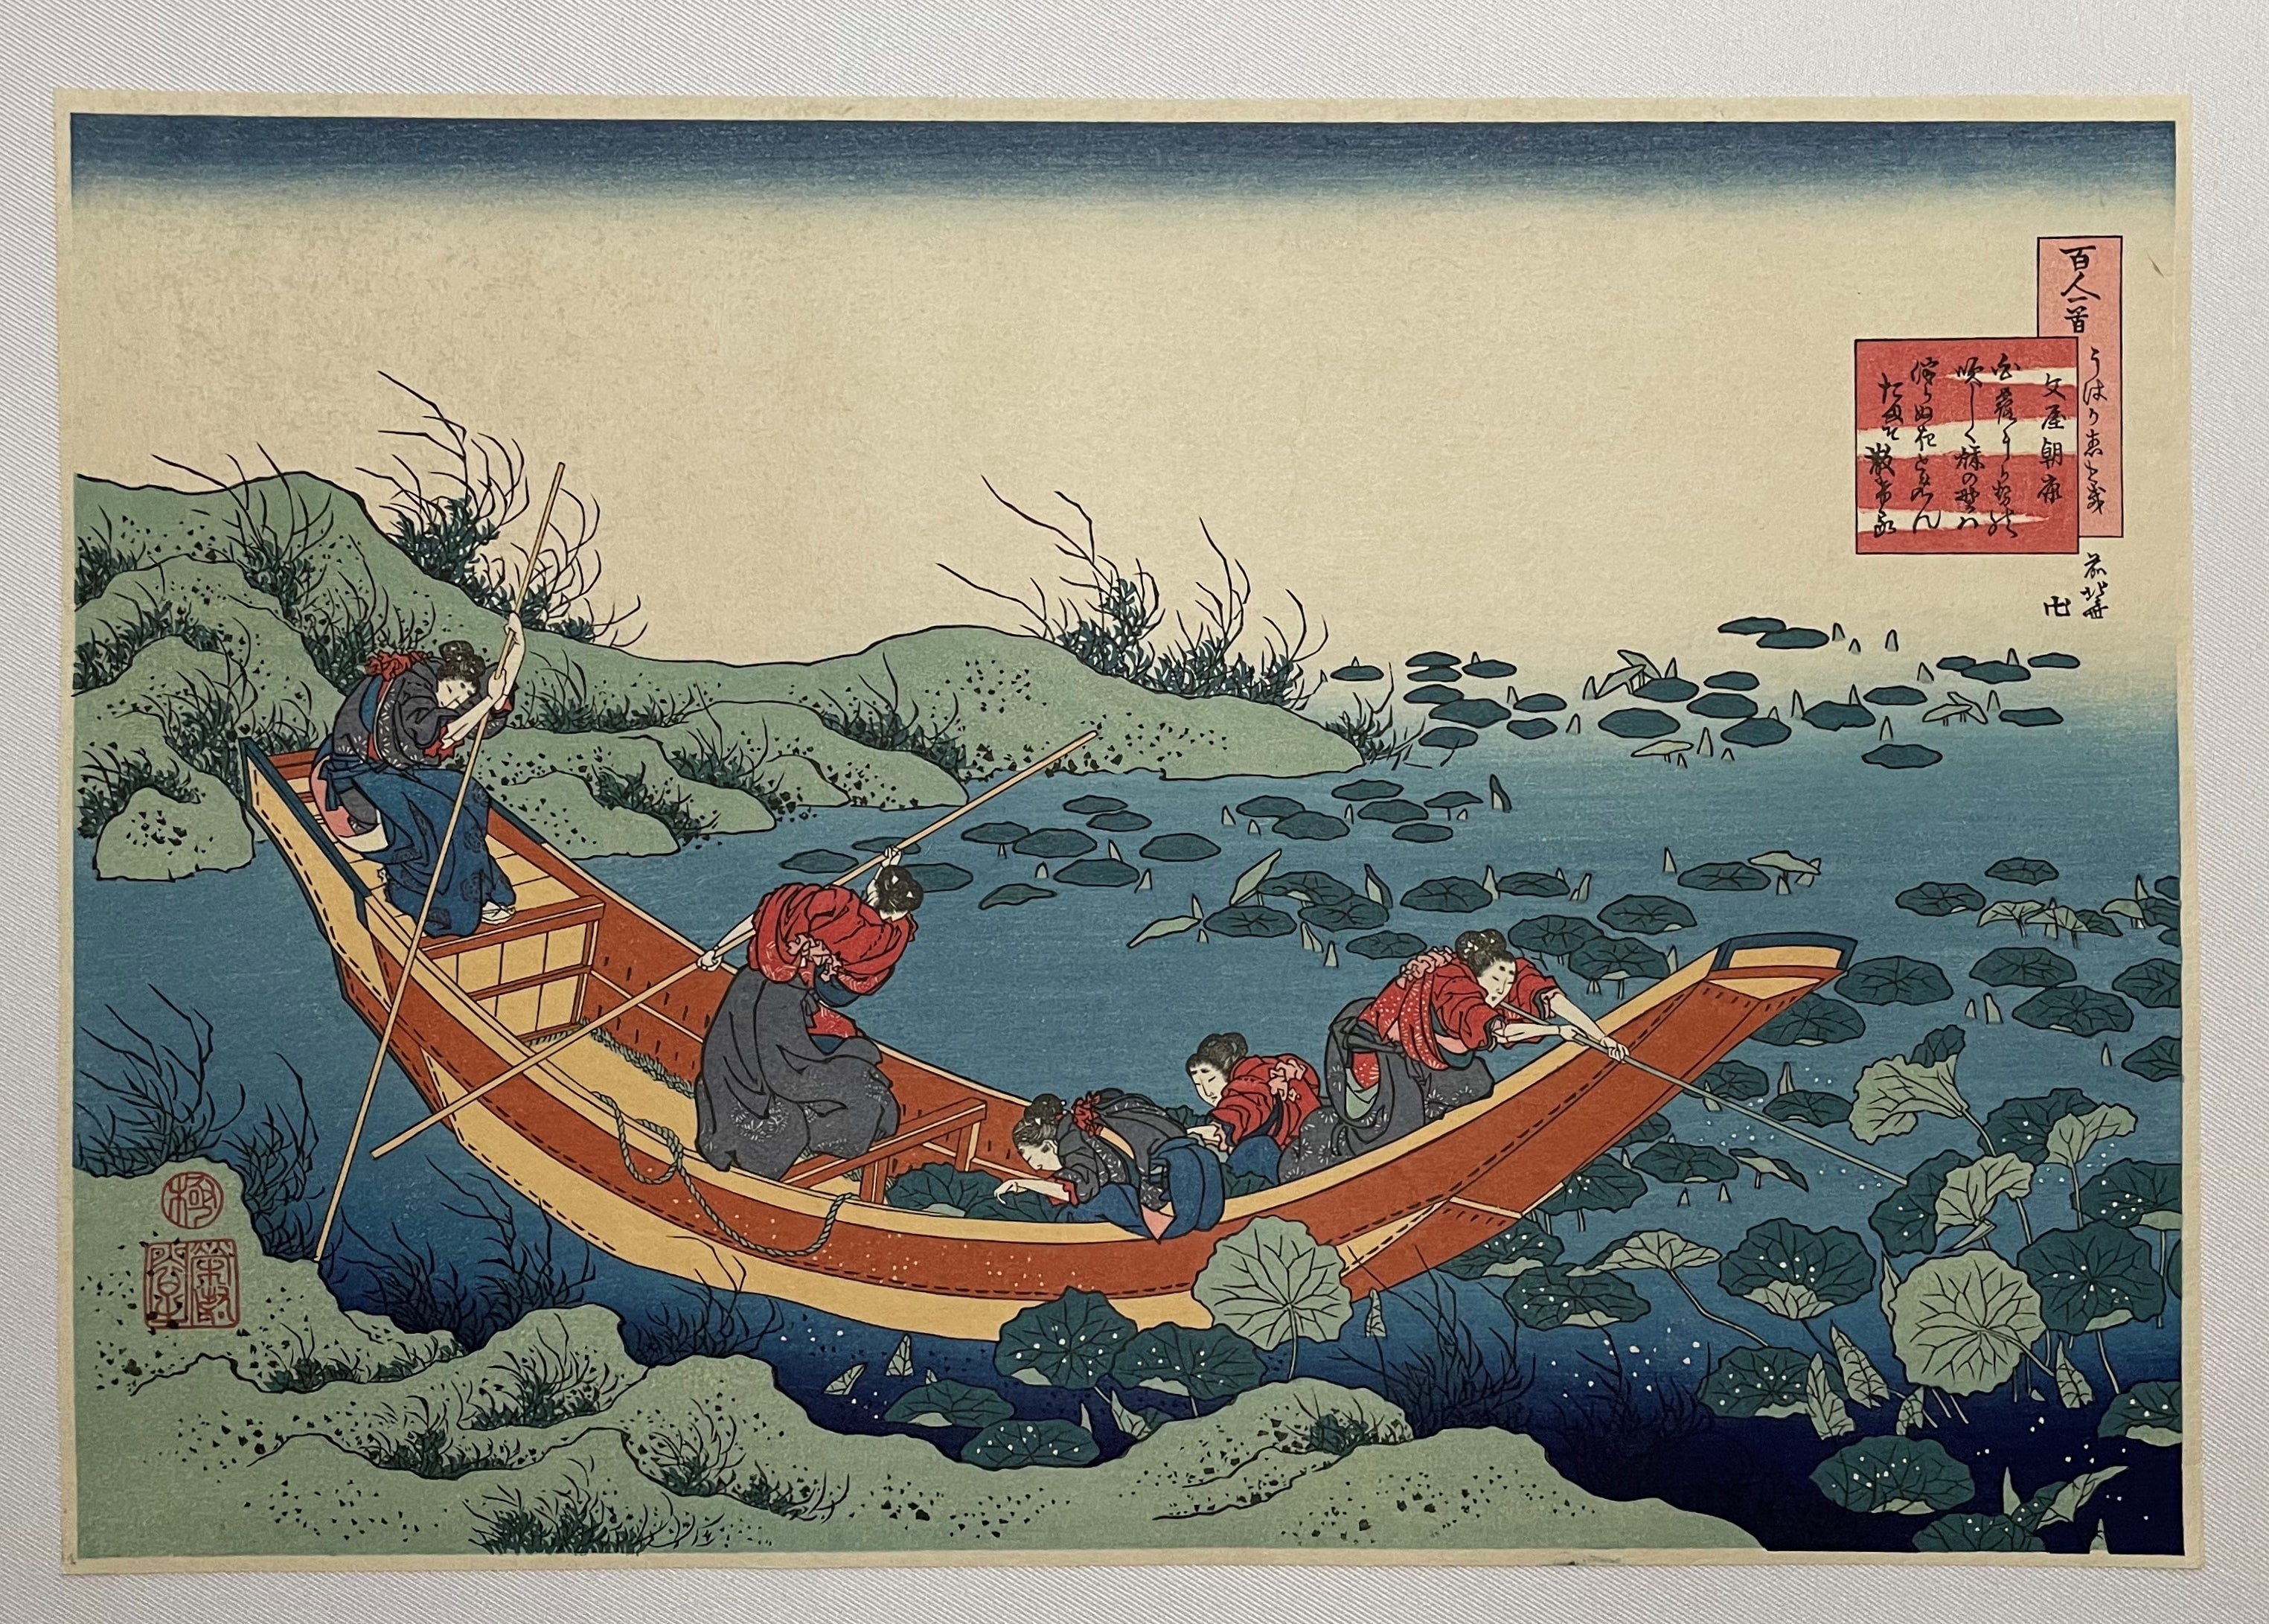 Cutting Water Lilies by Hokusai (Woodblock Print)